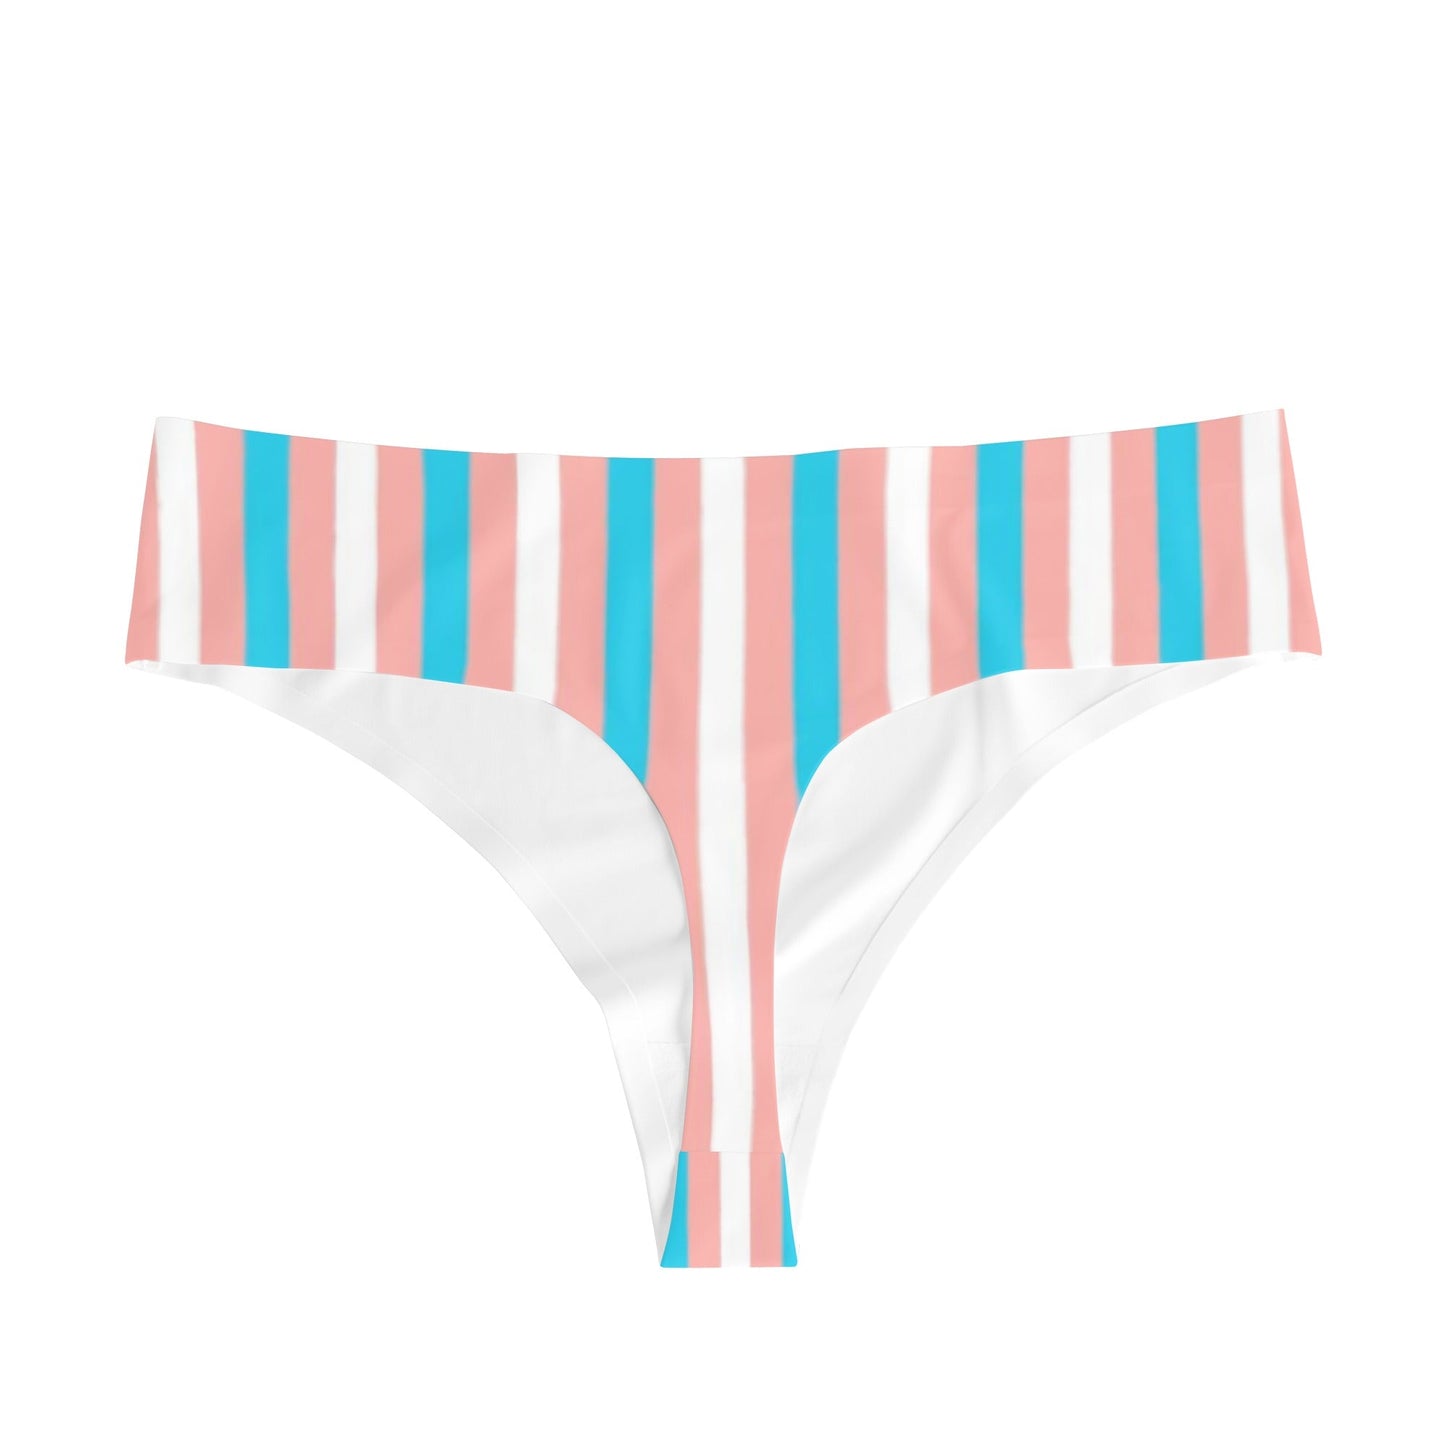 Trans Coloured Trans Pride Candy Striped Thong Knickers